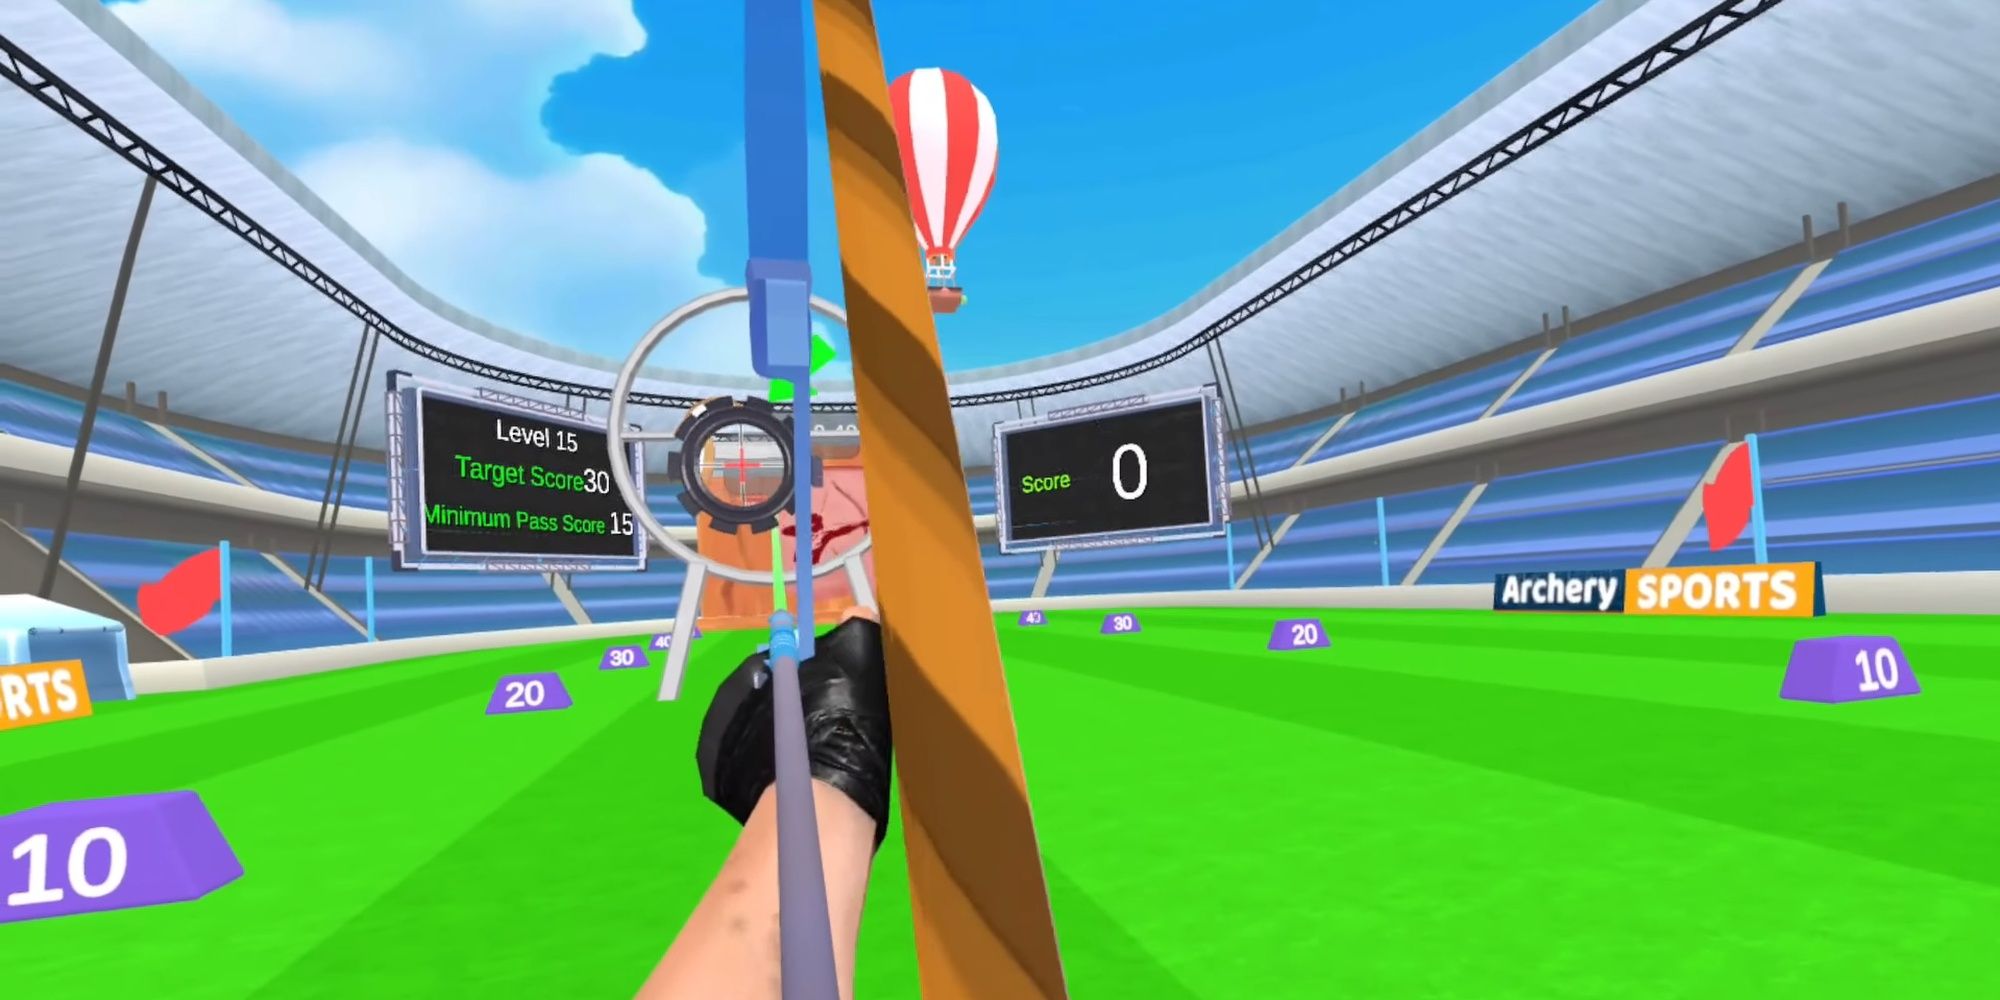 Archery Battle VR: Using A Bows Telescopic Sight To Aim At Targets